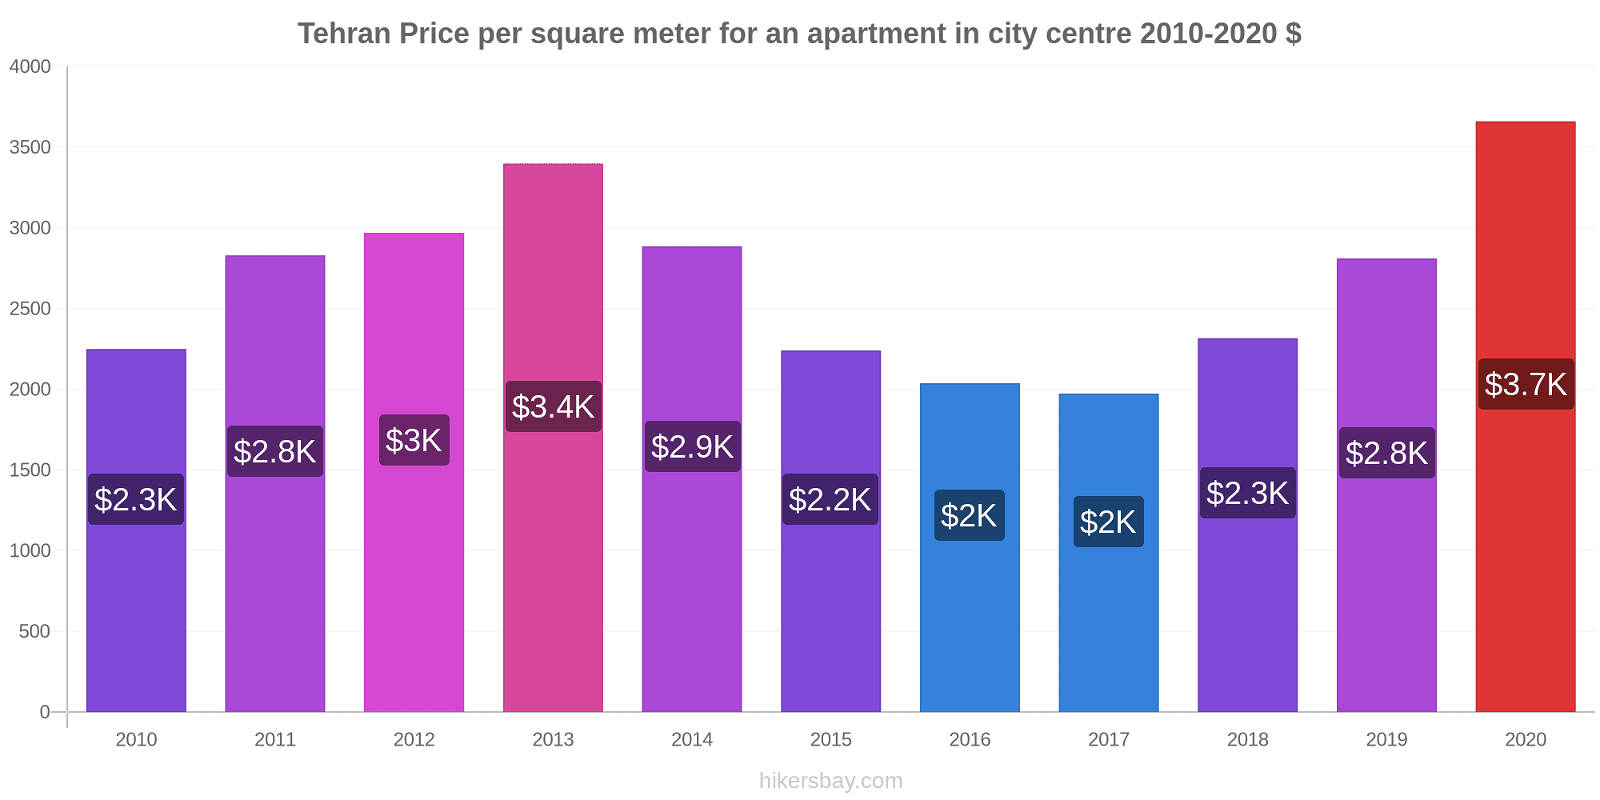 Tehran price changes Price per square meter for an apartment in city centre hikersbay.com